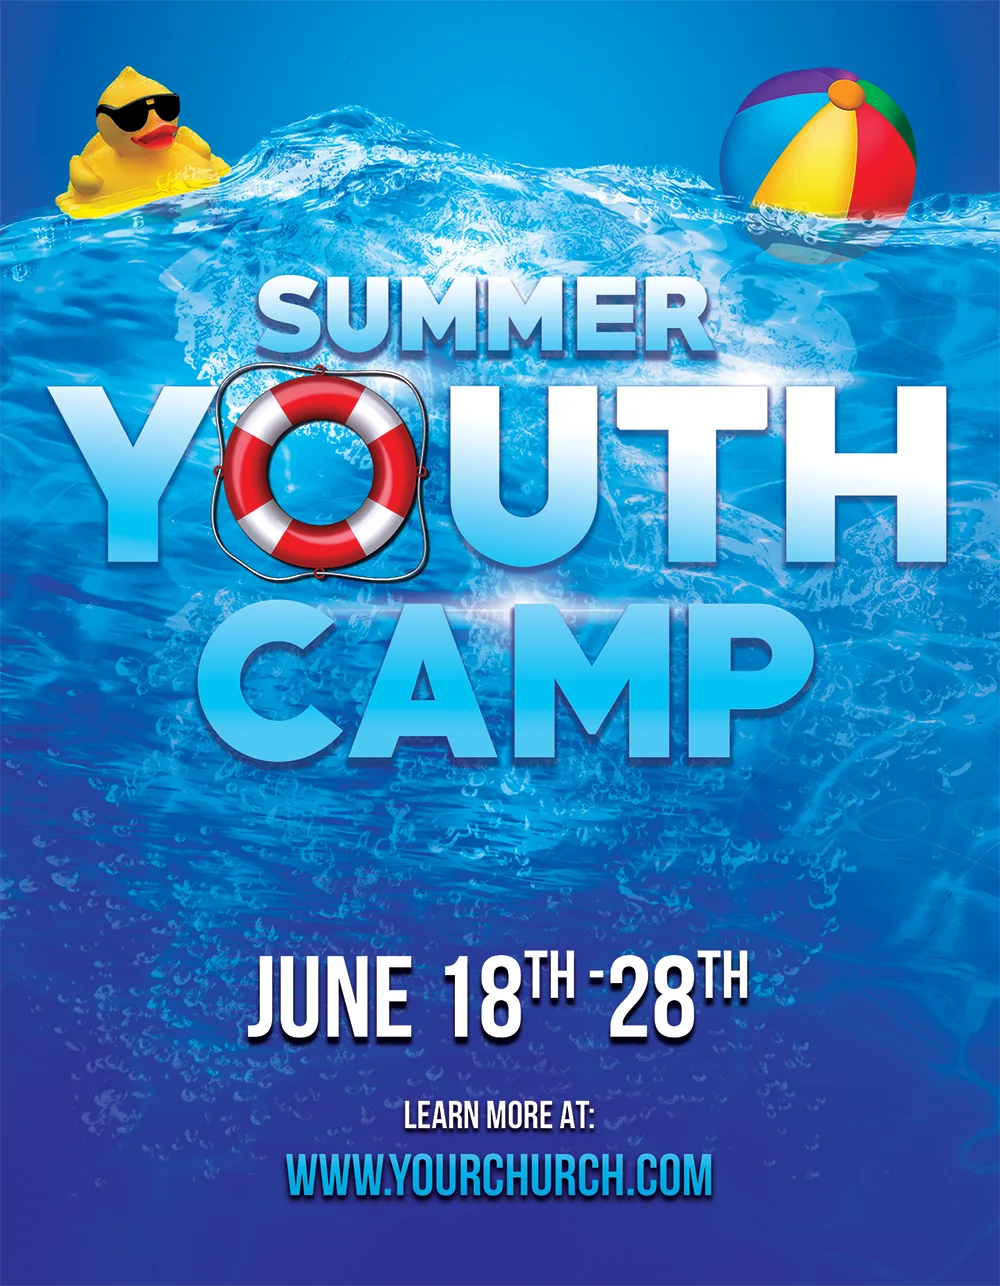 Free Church Flyer – Summer Youth Camp by Ministry Voice